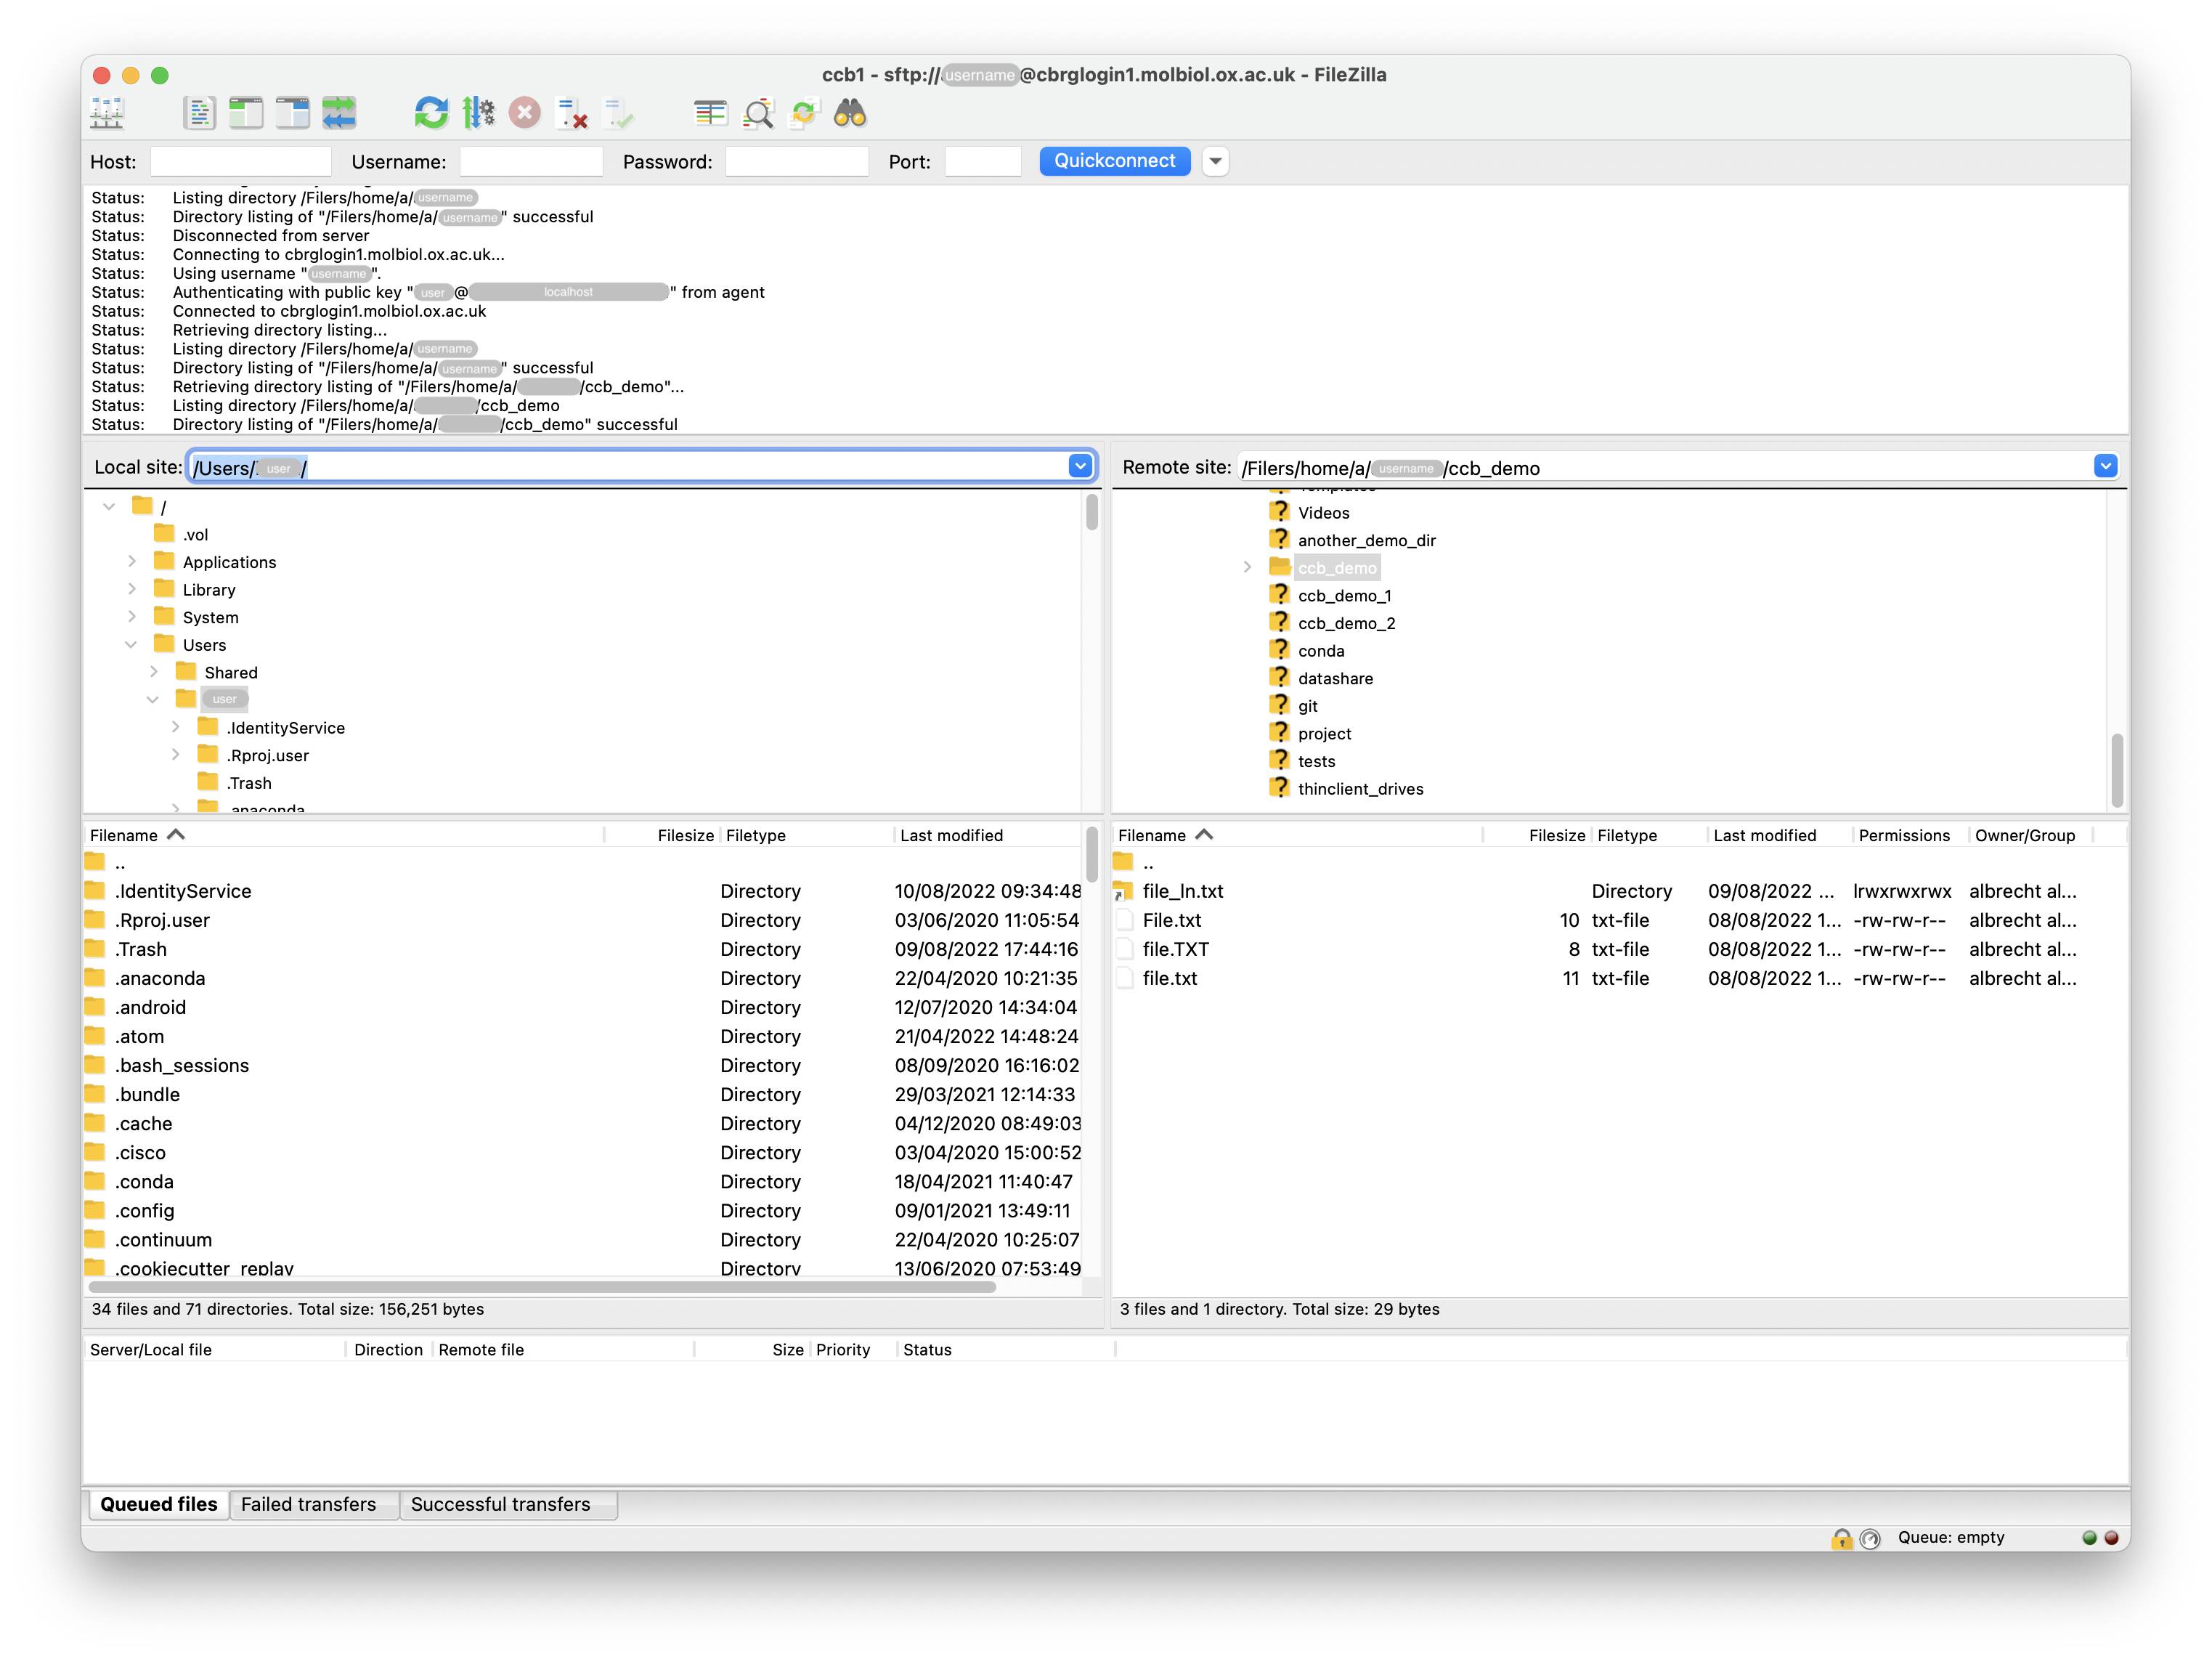 Example view of the FileZilla Client (main window).